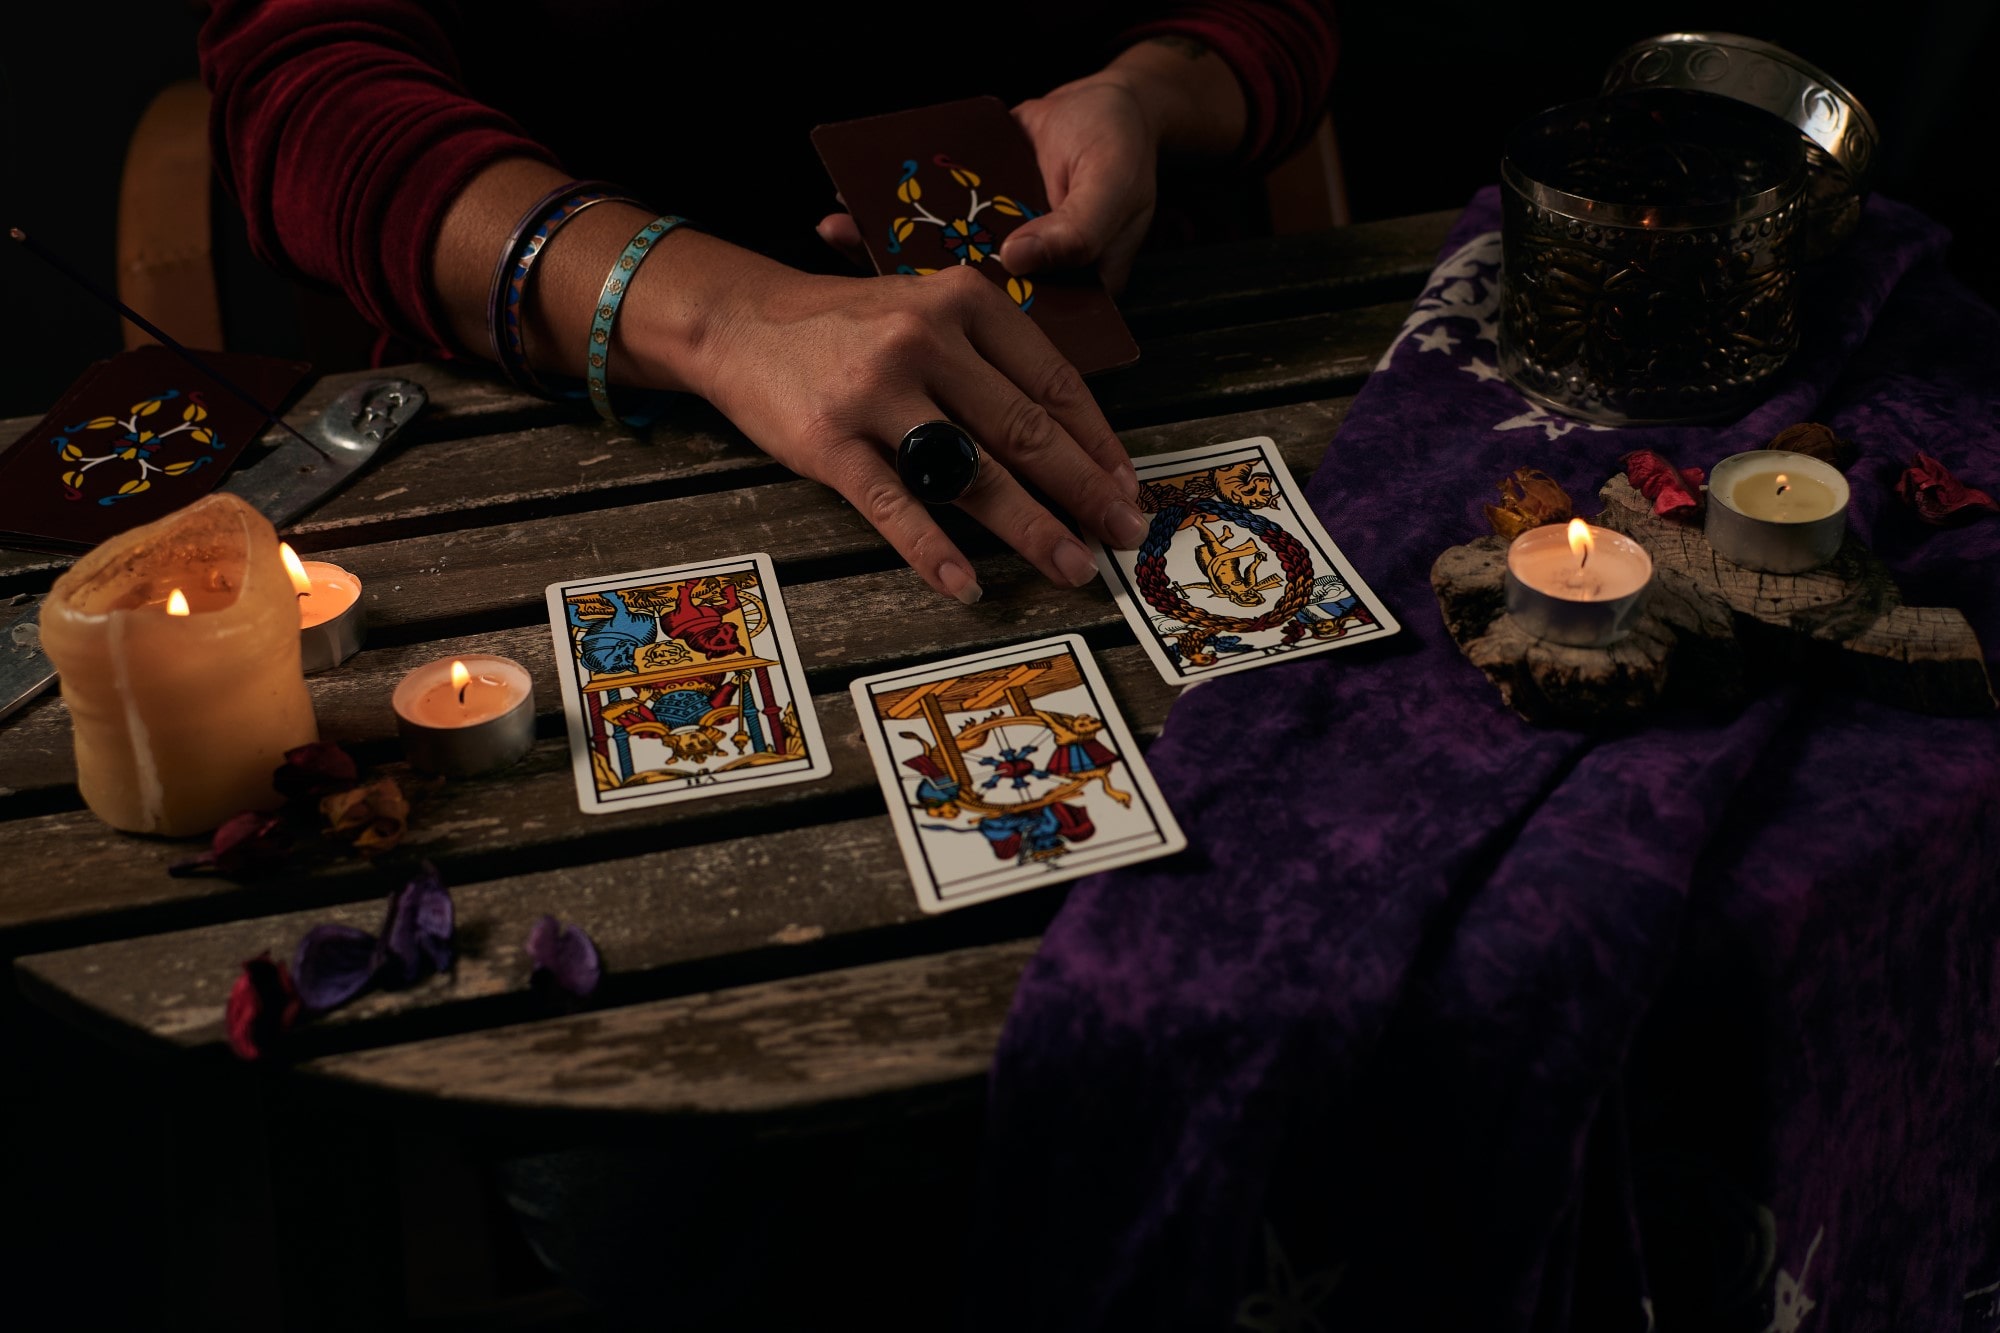 Love Tarot and The Wheel Of Fortune Card